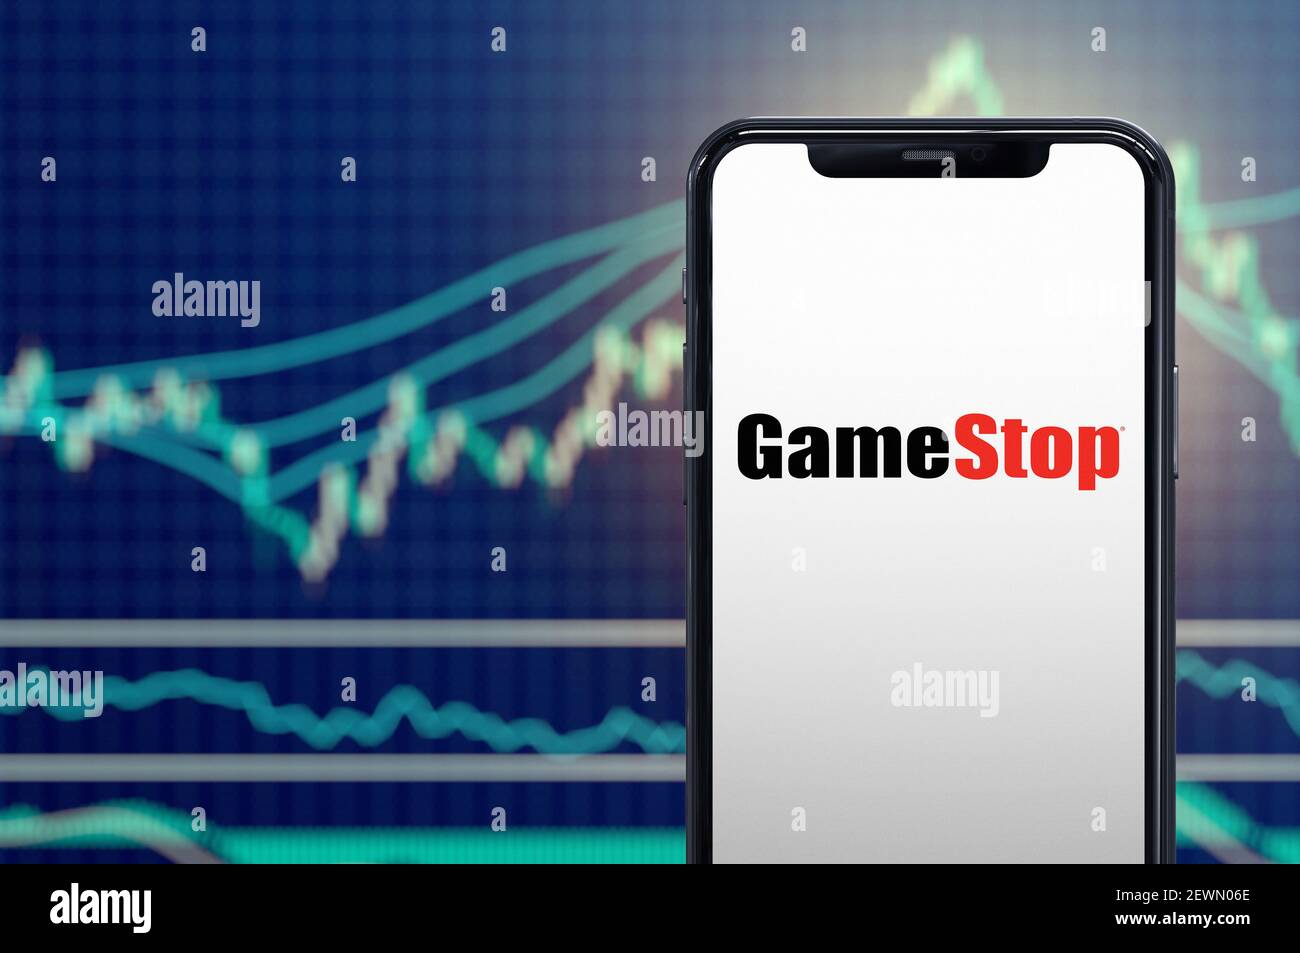 Milan, Italy: February 26, 2021: Gamestop retail company logo on the smartphone and its authentic stock price chart for the last 5 days. 3d rendering Stock Photo